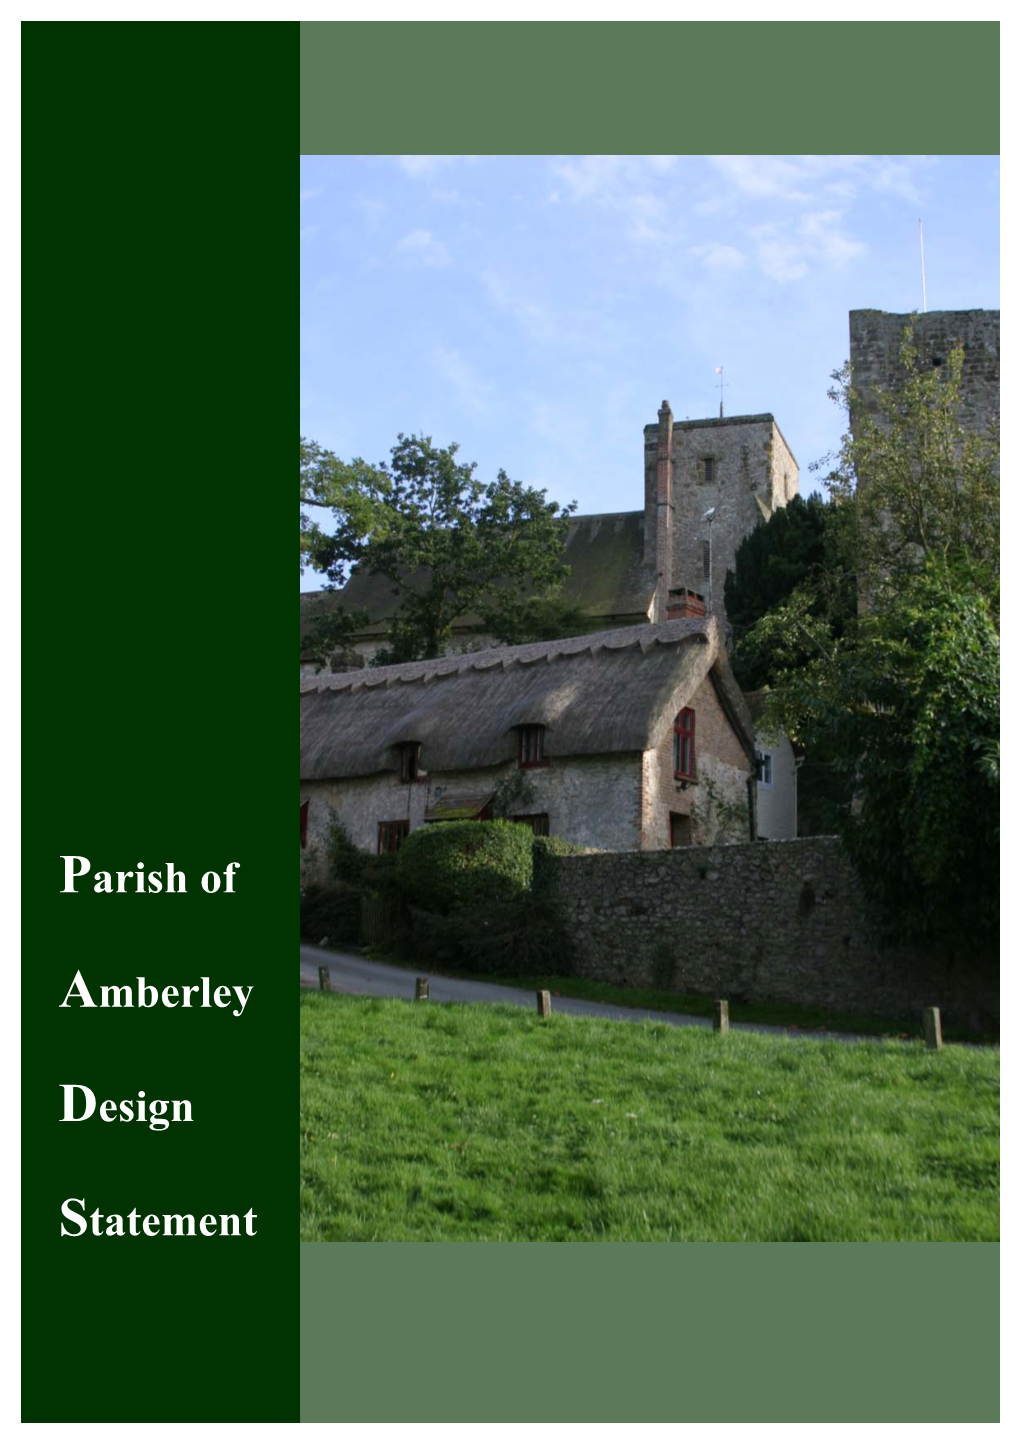 Parish of Amberley Design Statement Was Formally Adopted by Amberley Parish Council on 11Th May 2005 and Endorsed by Horsham District Council on 30Th March 2006